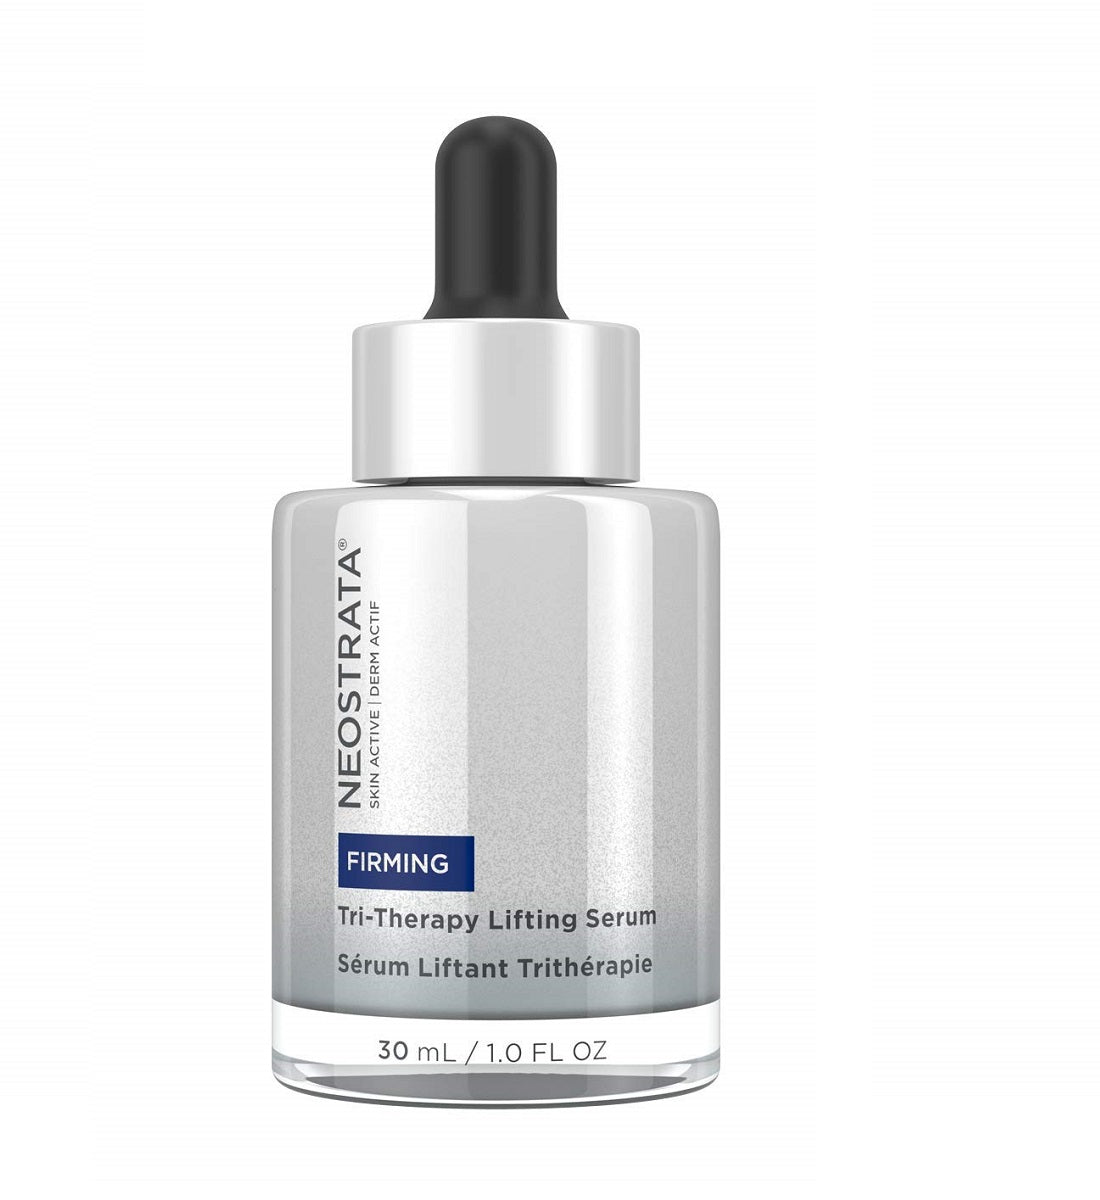 Neostrata Firming Skin Active Tri-Therapy Lifting Serum